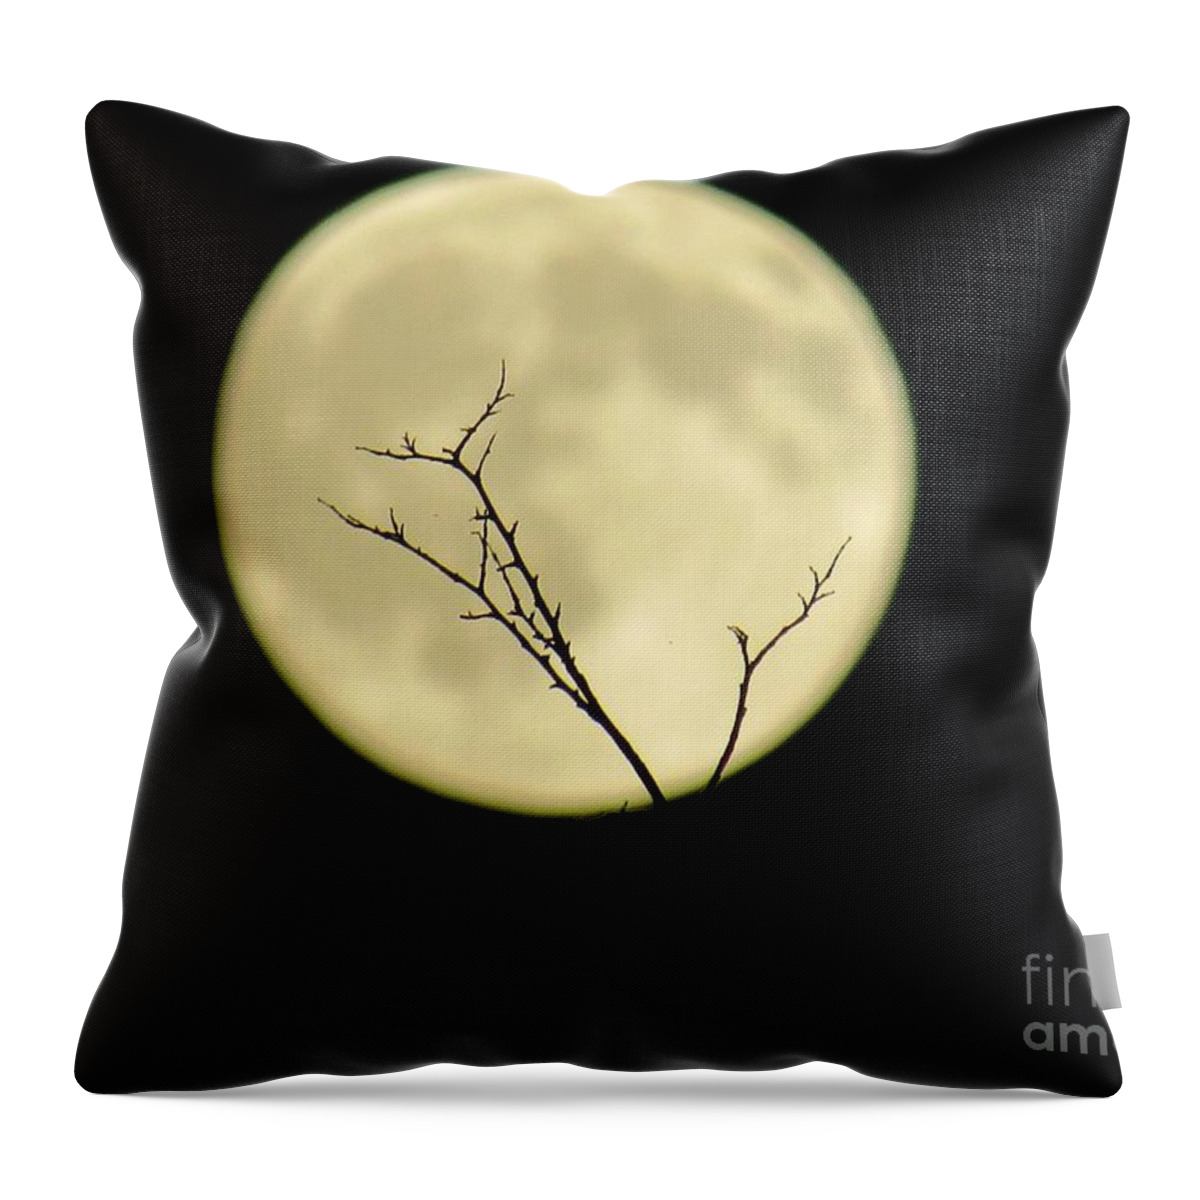  Throw Pillow featuring the photograph Reaching Out Into the Night by Kelly Awad